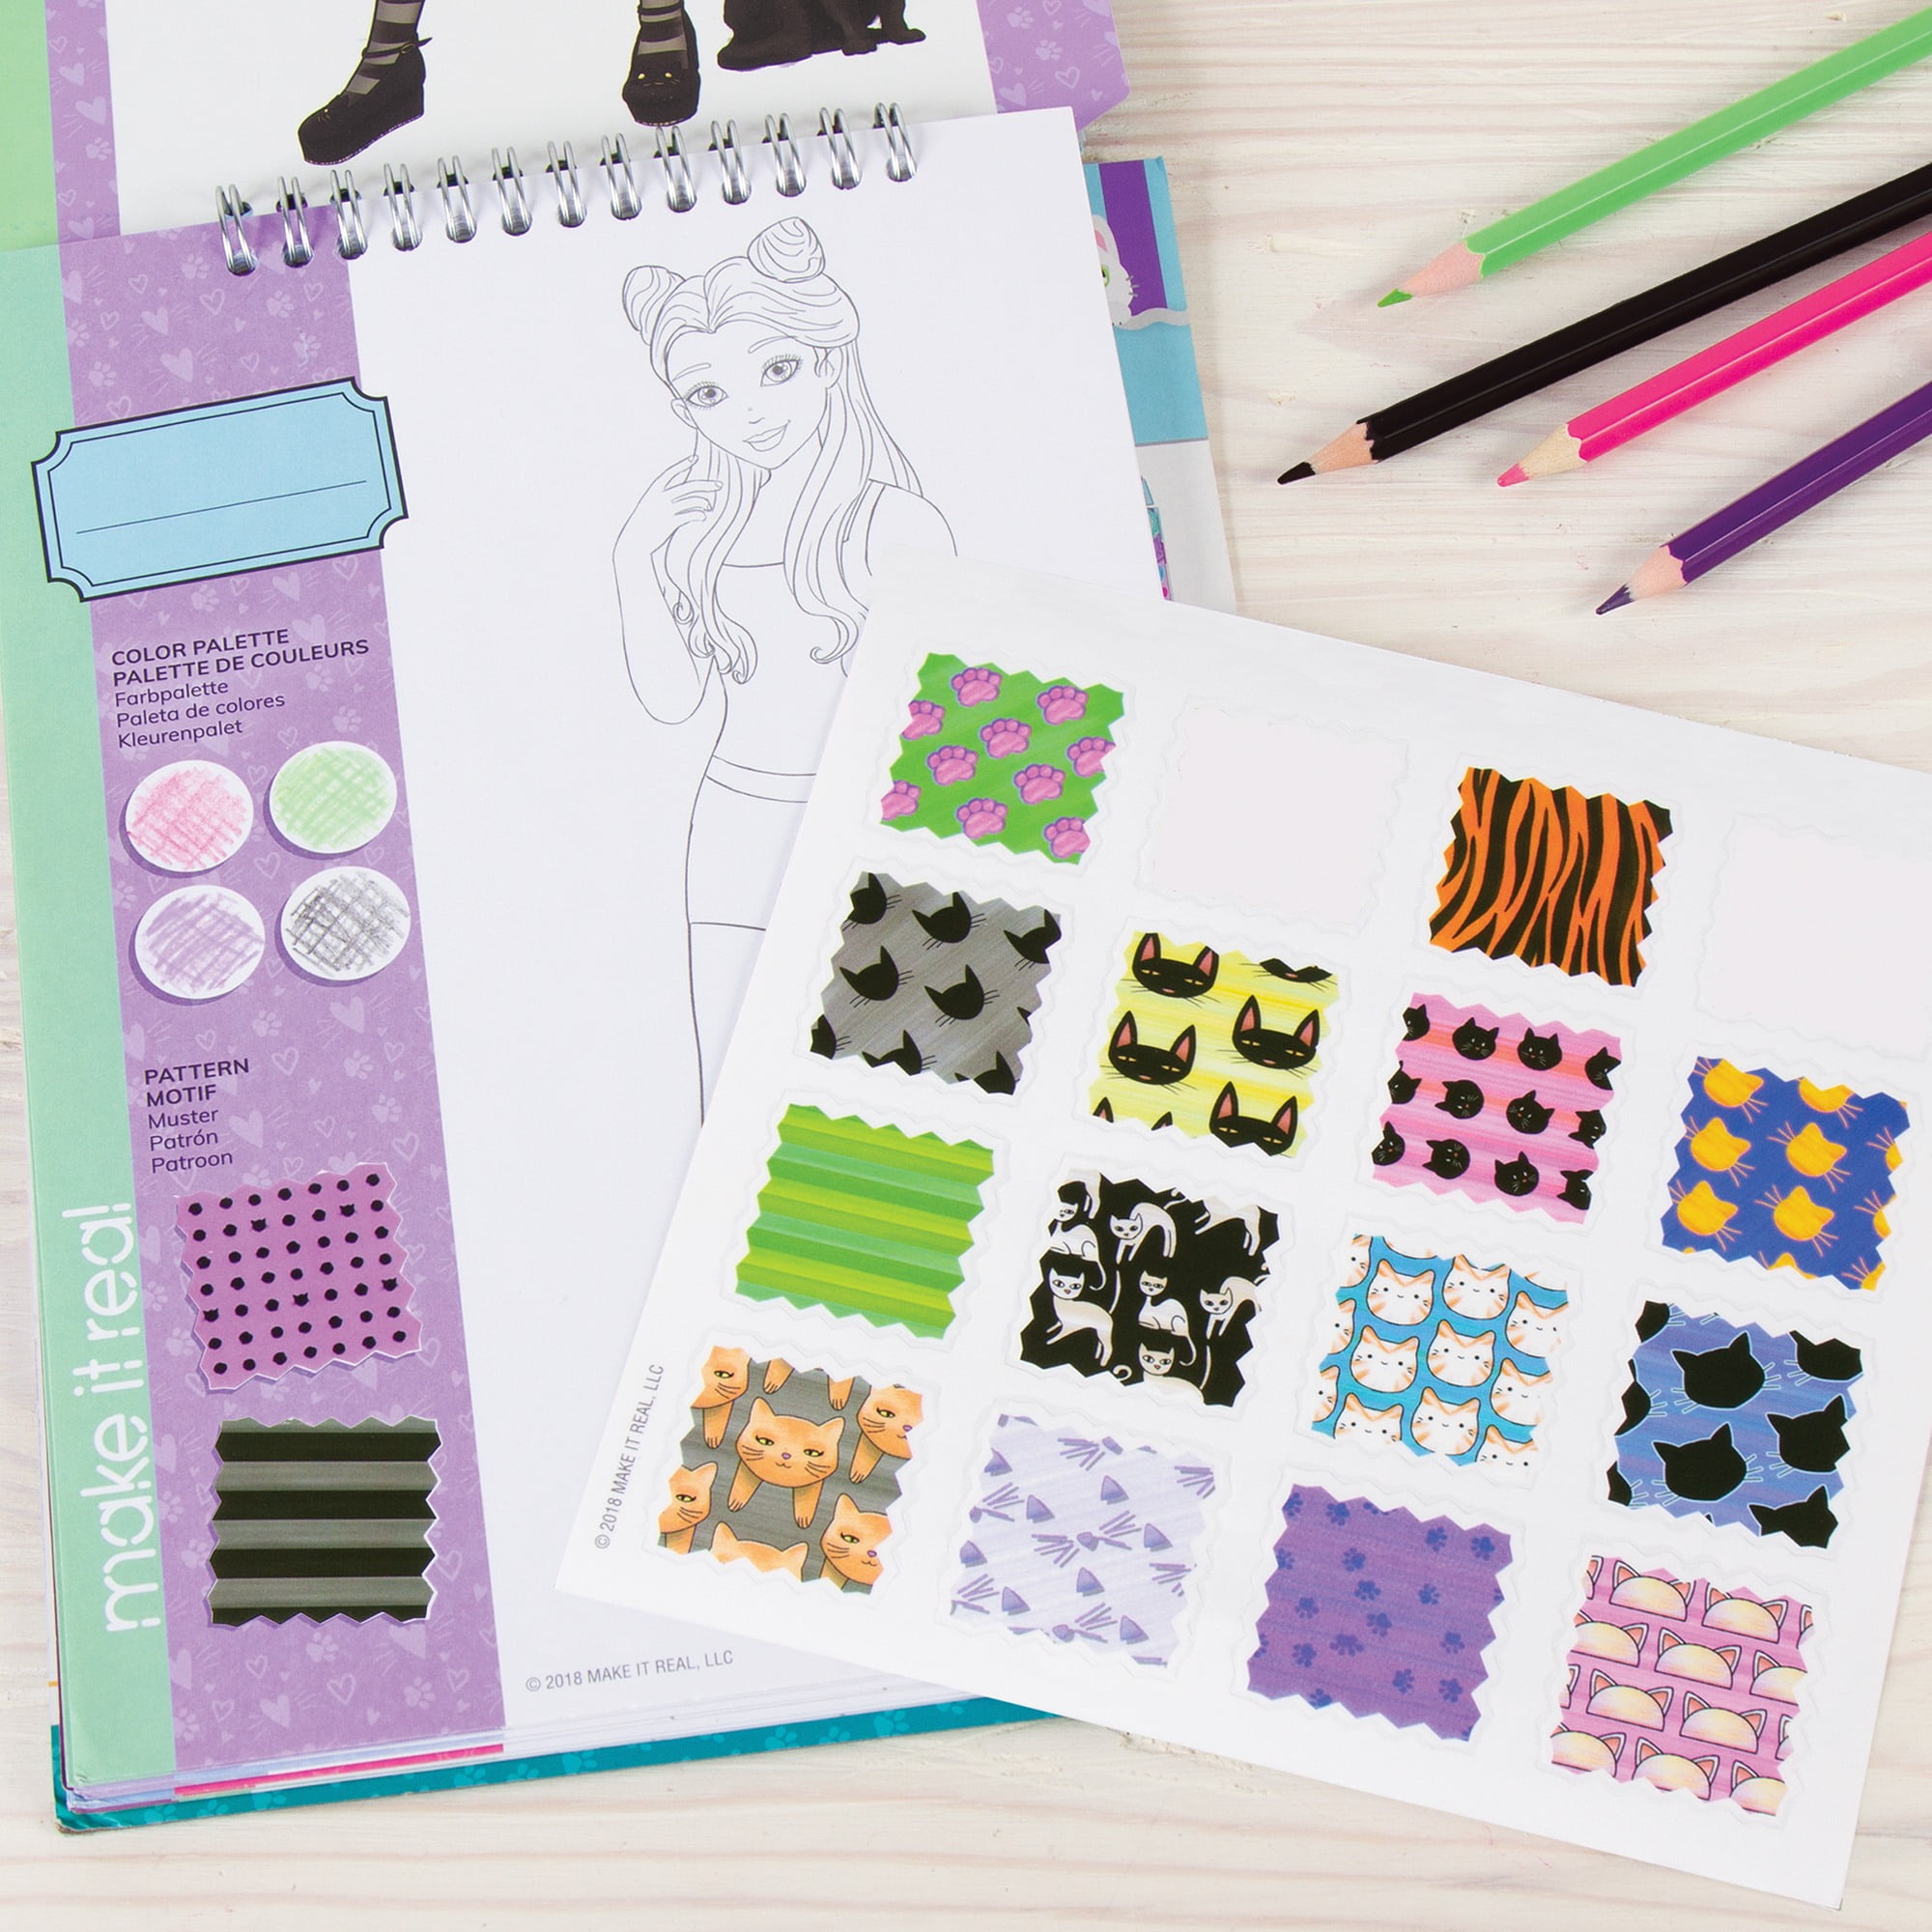 Make It Real: Fashion Design Sketchbook: Blooming Creativity - Includes 90  Stickers & Stencils, Draw Sketch & Create, Fashion Coloring Book, Tweens 